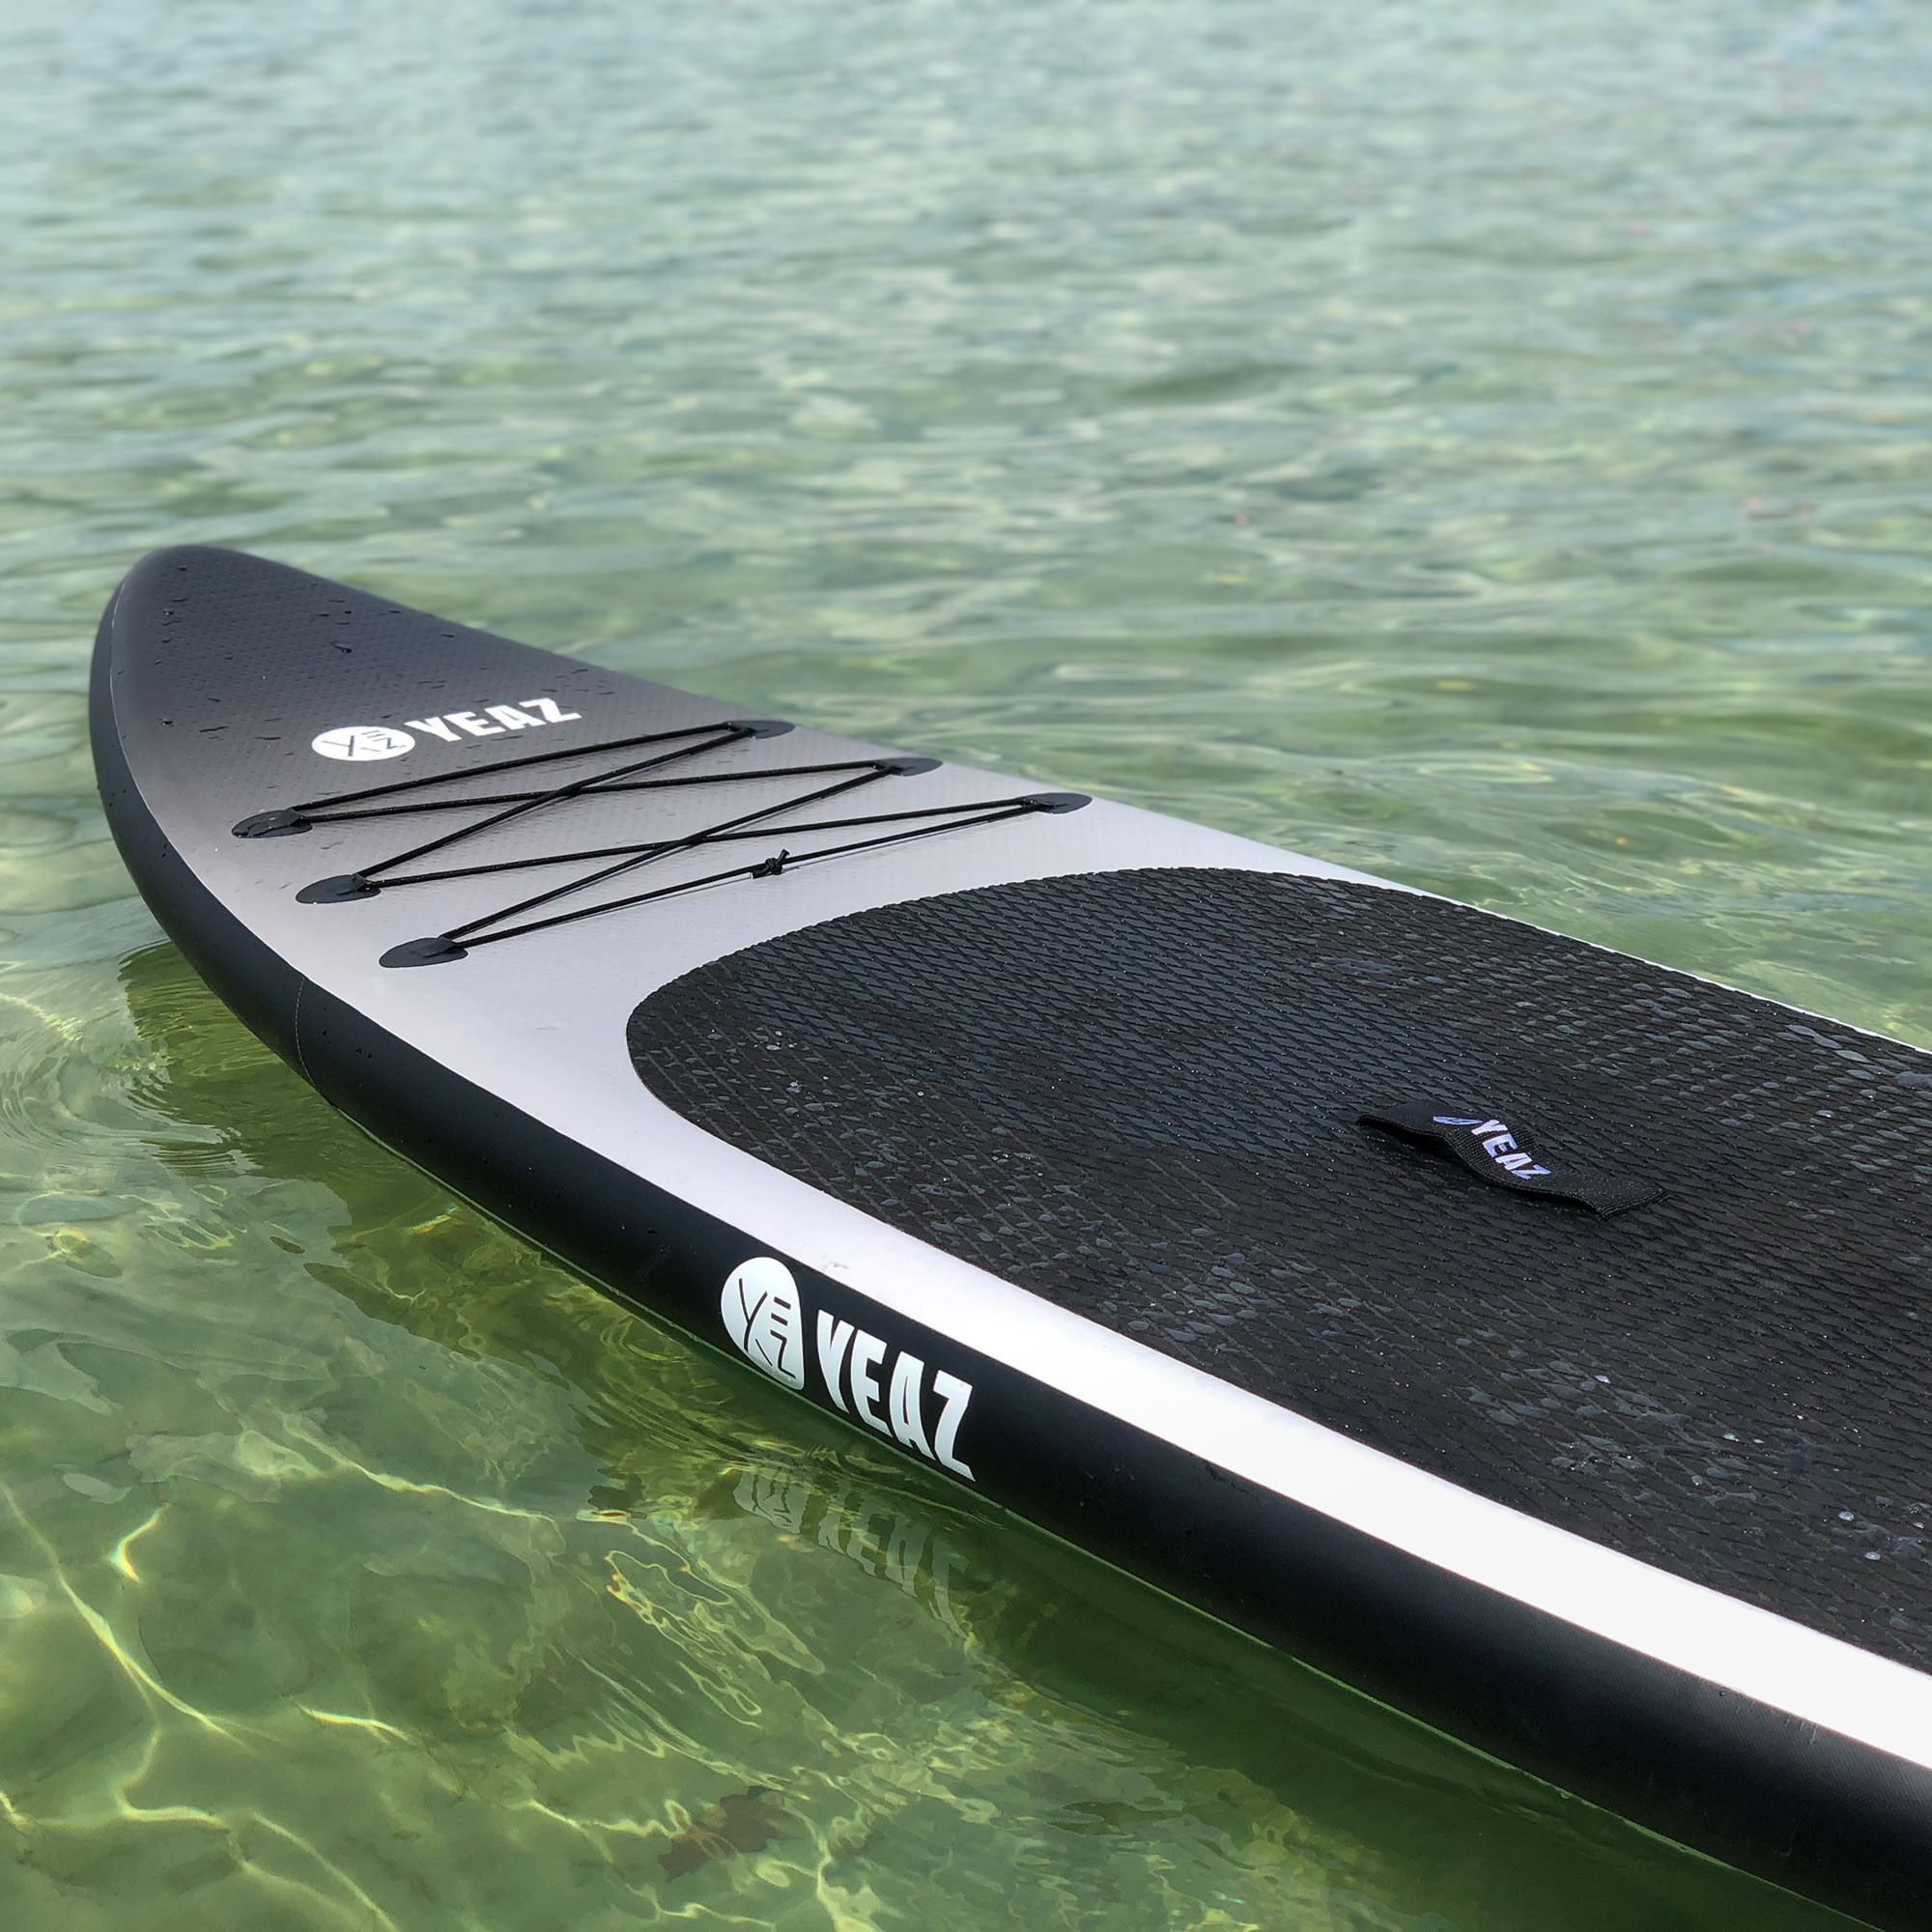 SET shadow SUP, SANDS - evening EXOTRACE BEACH YEAZ - BLACK